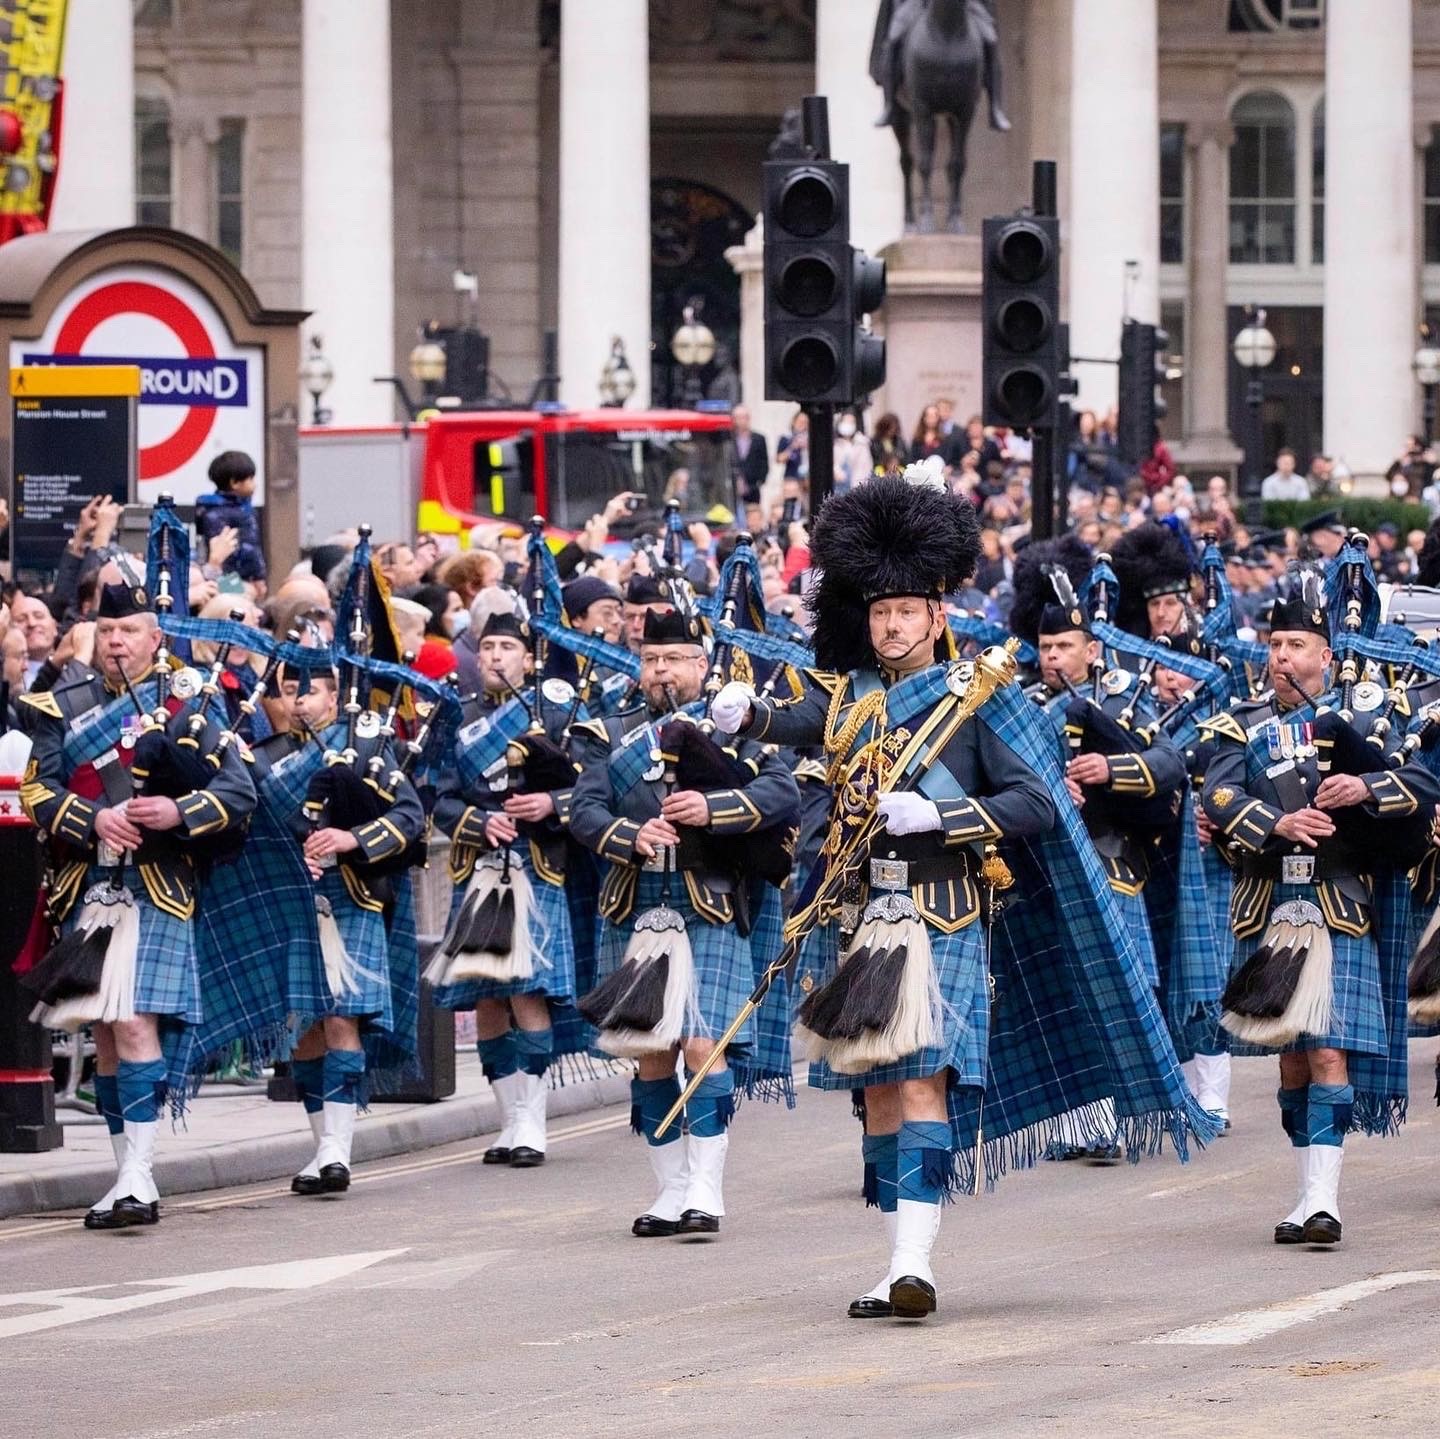 Image shows RAF Pipes and Drummers parading in London.